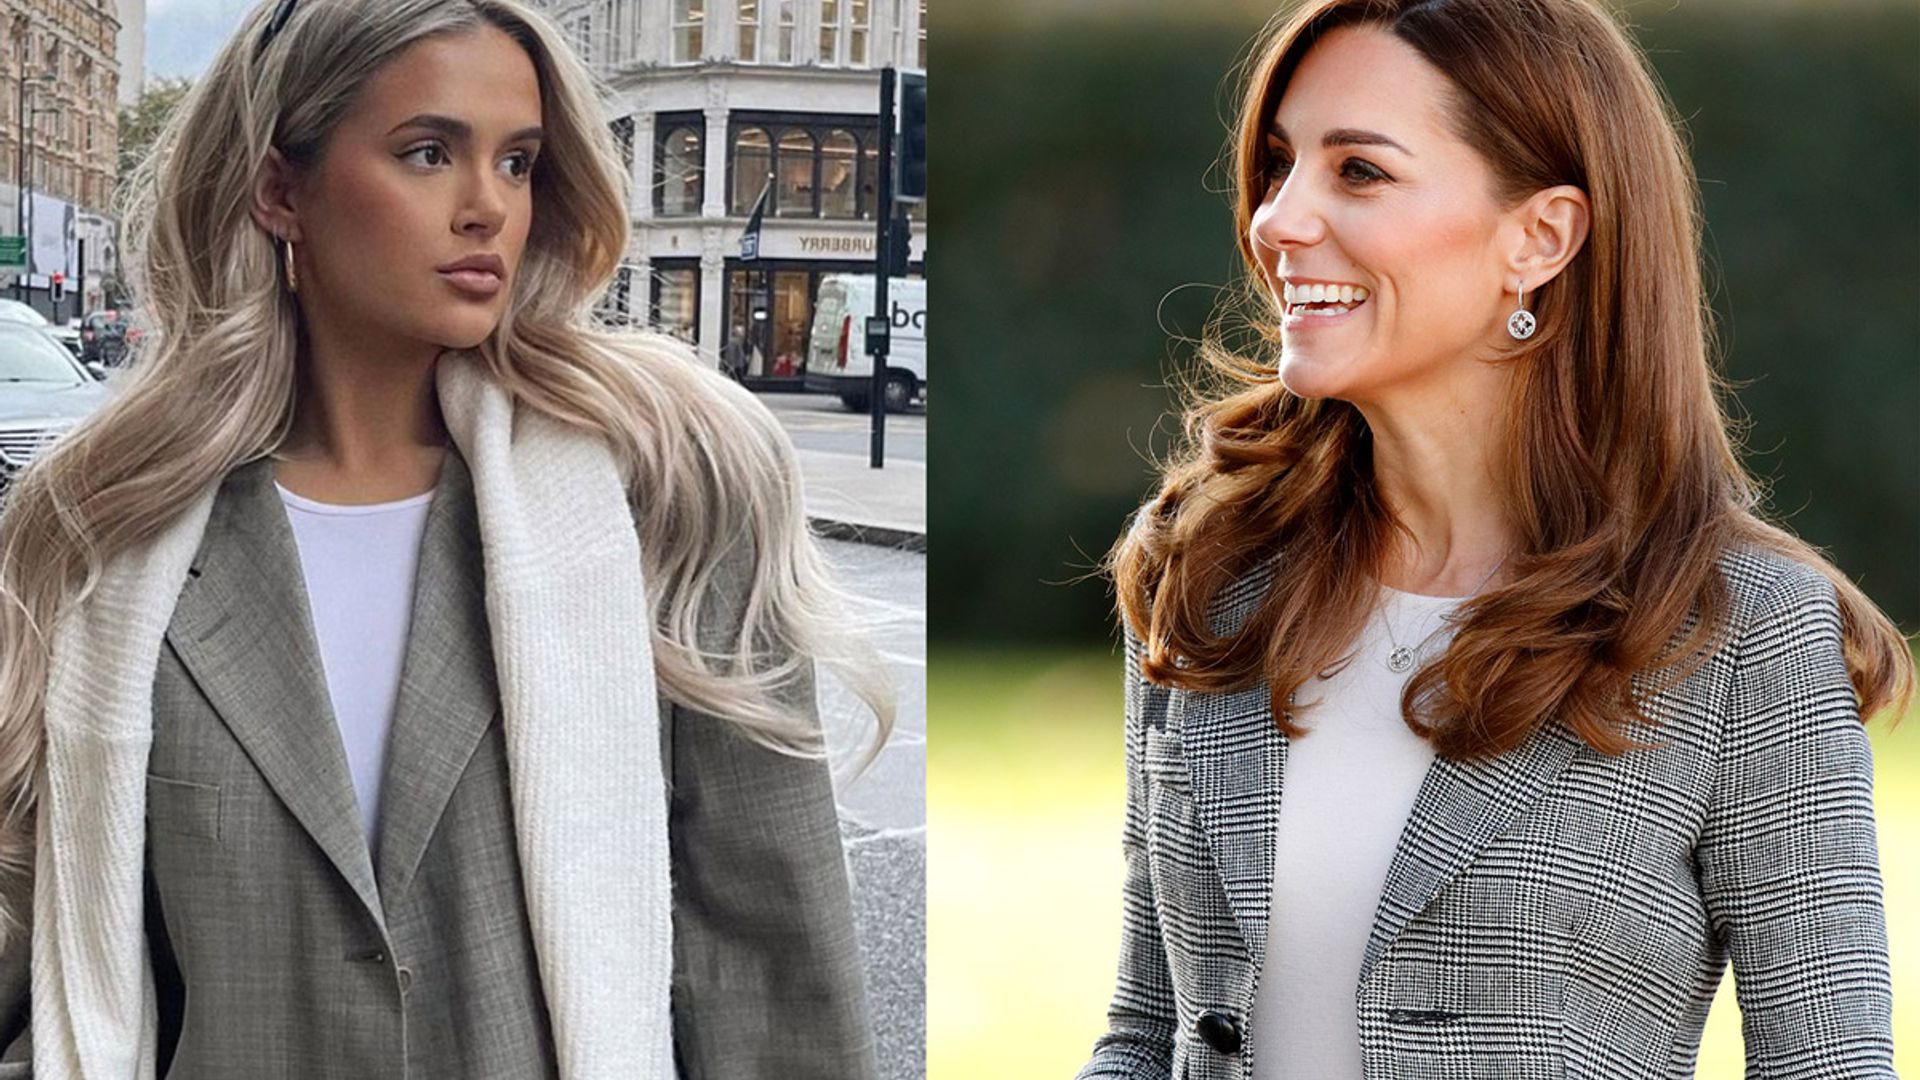 molly mae and kate middleton wearing blazers